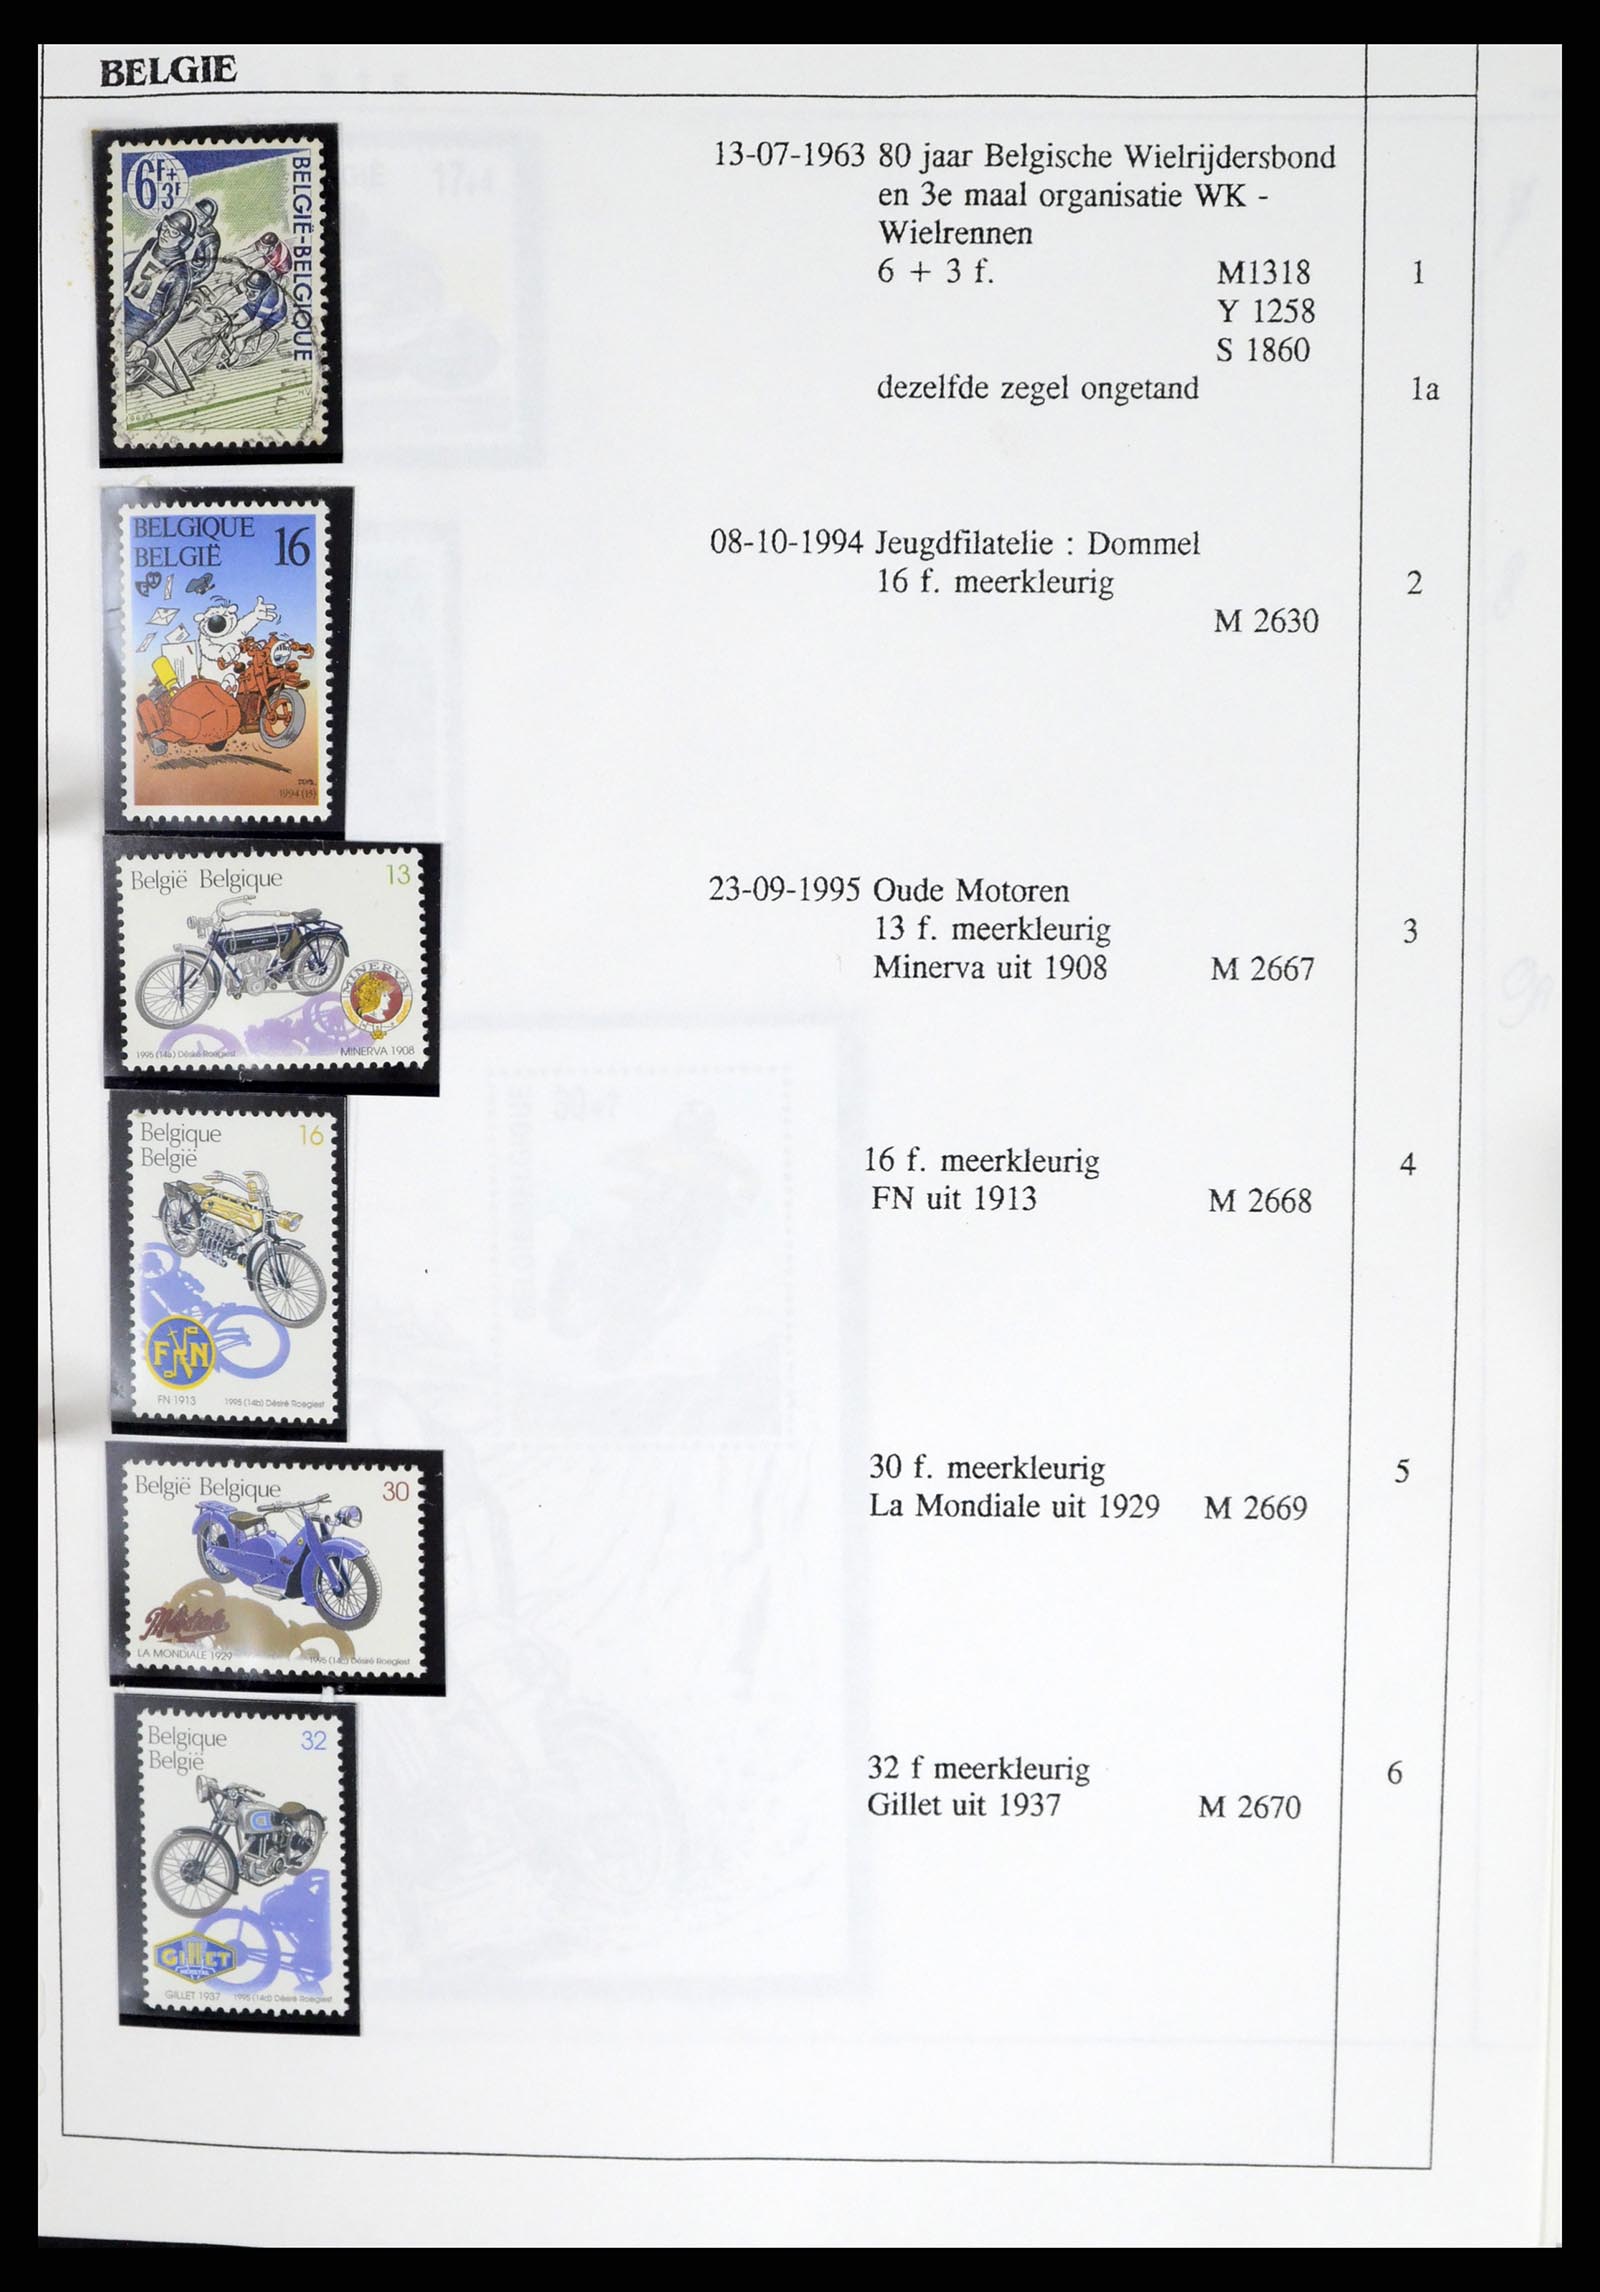 37462 022 - Stamp collection 37462 Thematics Motorcycles 1922-2000.